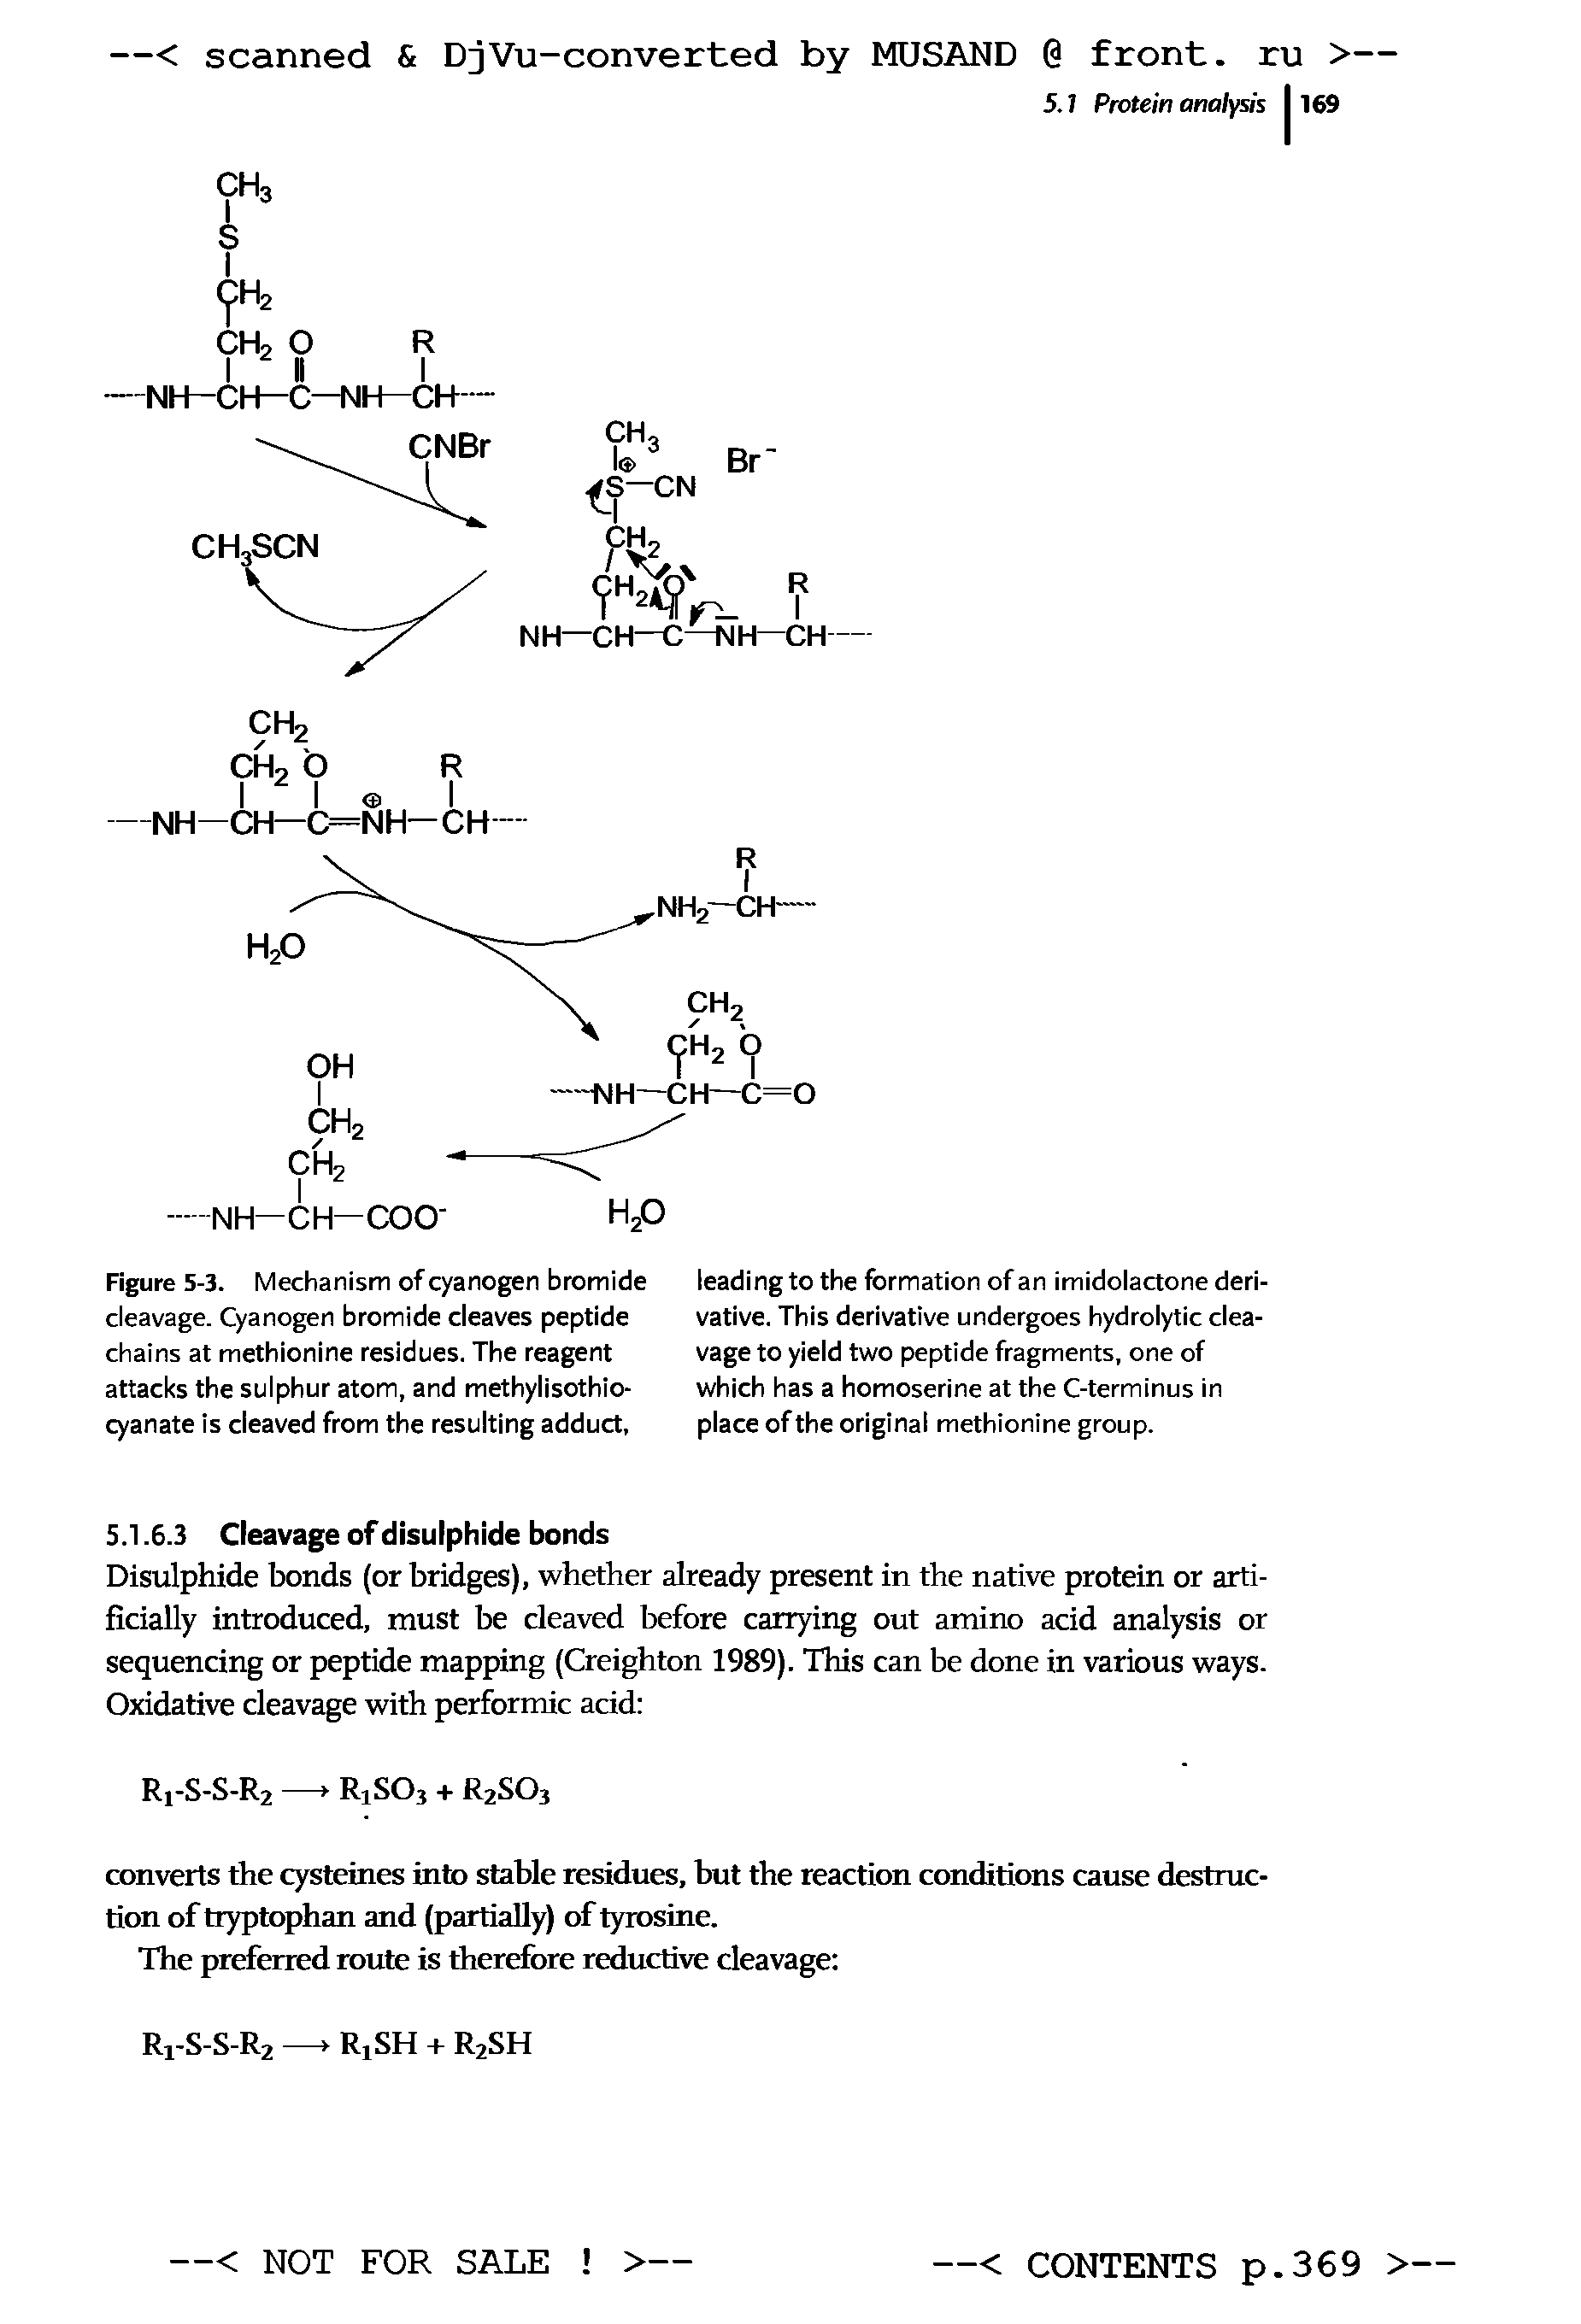 Figure 5-3. Mechanism of cyanogen bromide cleavage. Cyanogen bromide cleaves peptide chains at methionine residues. The reagent attacks the sulphur atom, and methylisothio-cyanate is cleaved from the resulting adduct,...